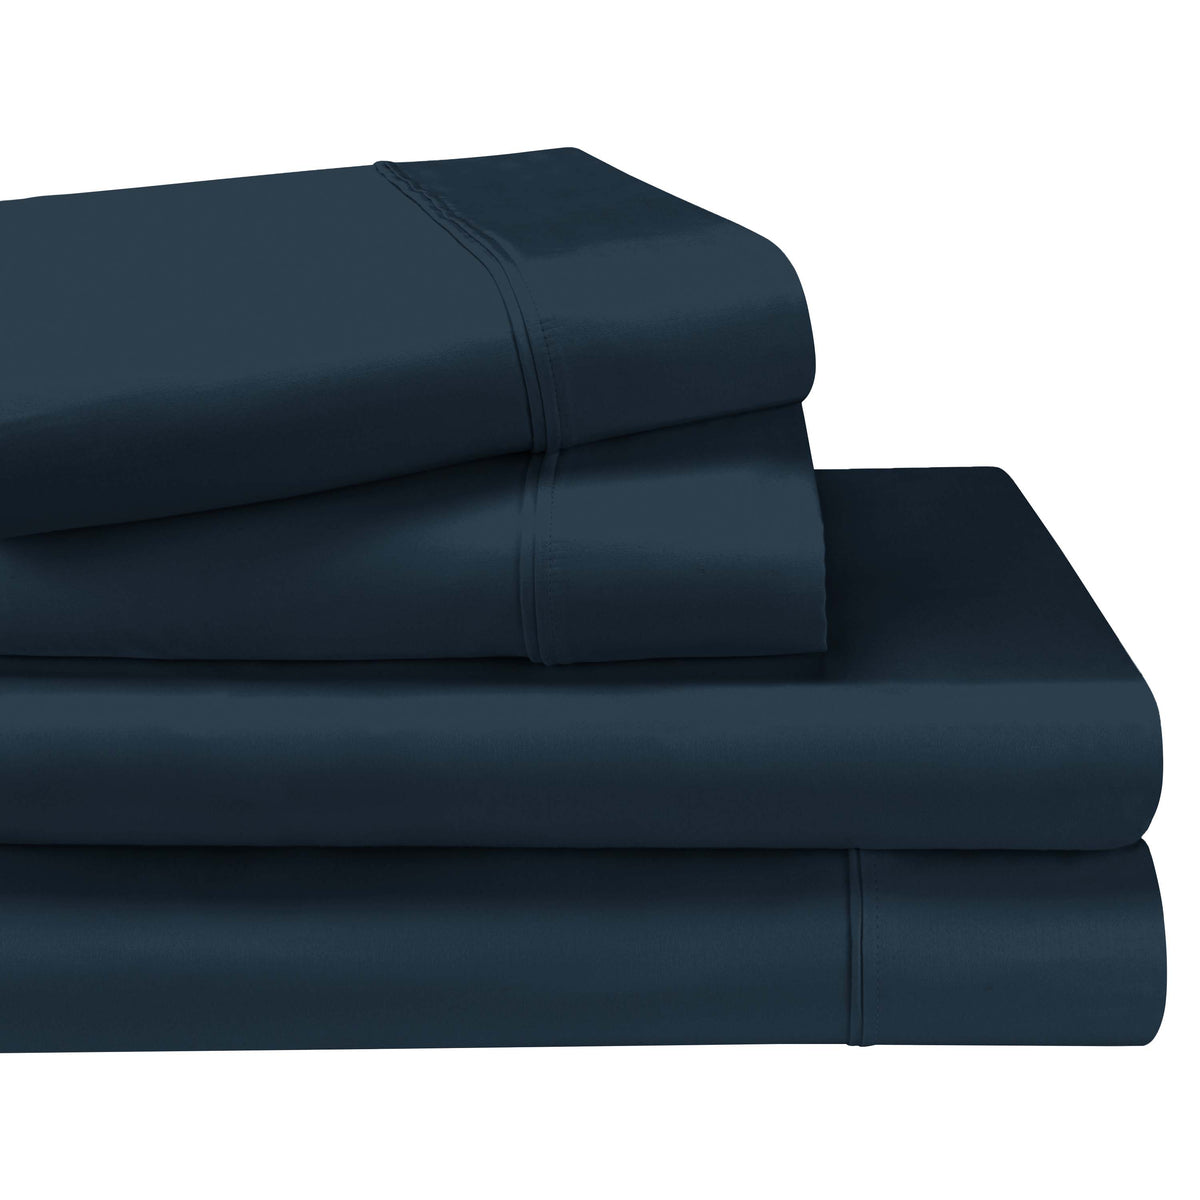 Egyptian Cotton 1200 Thread Count Eco-Friendly Solid Sheet Set - NavyBlue